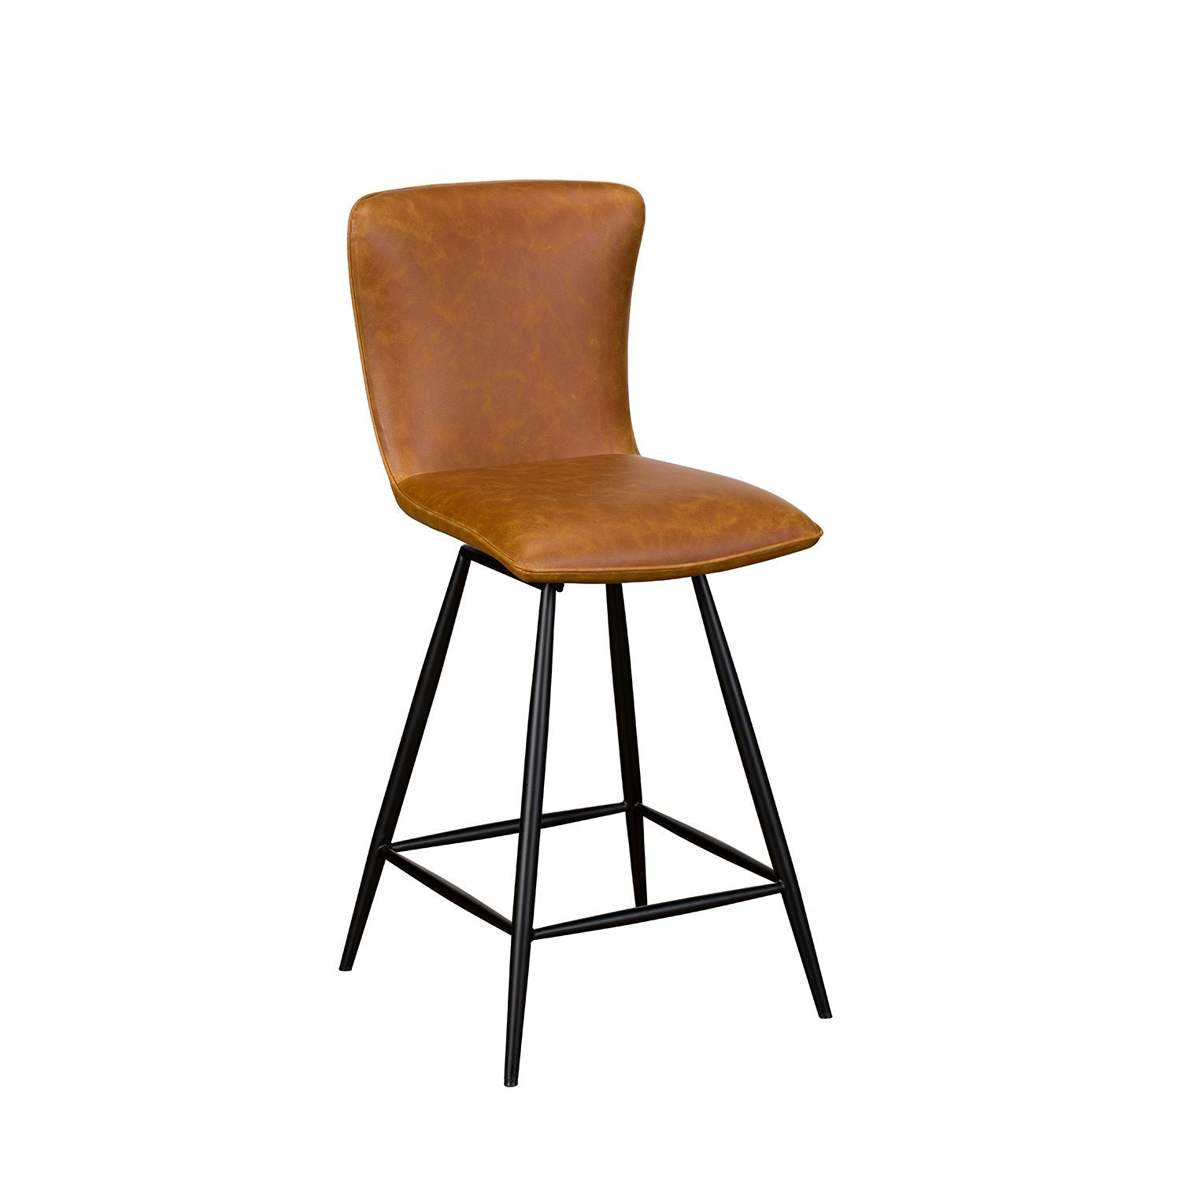 Shop Our Bar Stool Collection Online